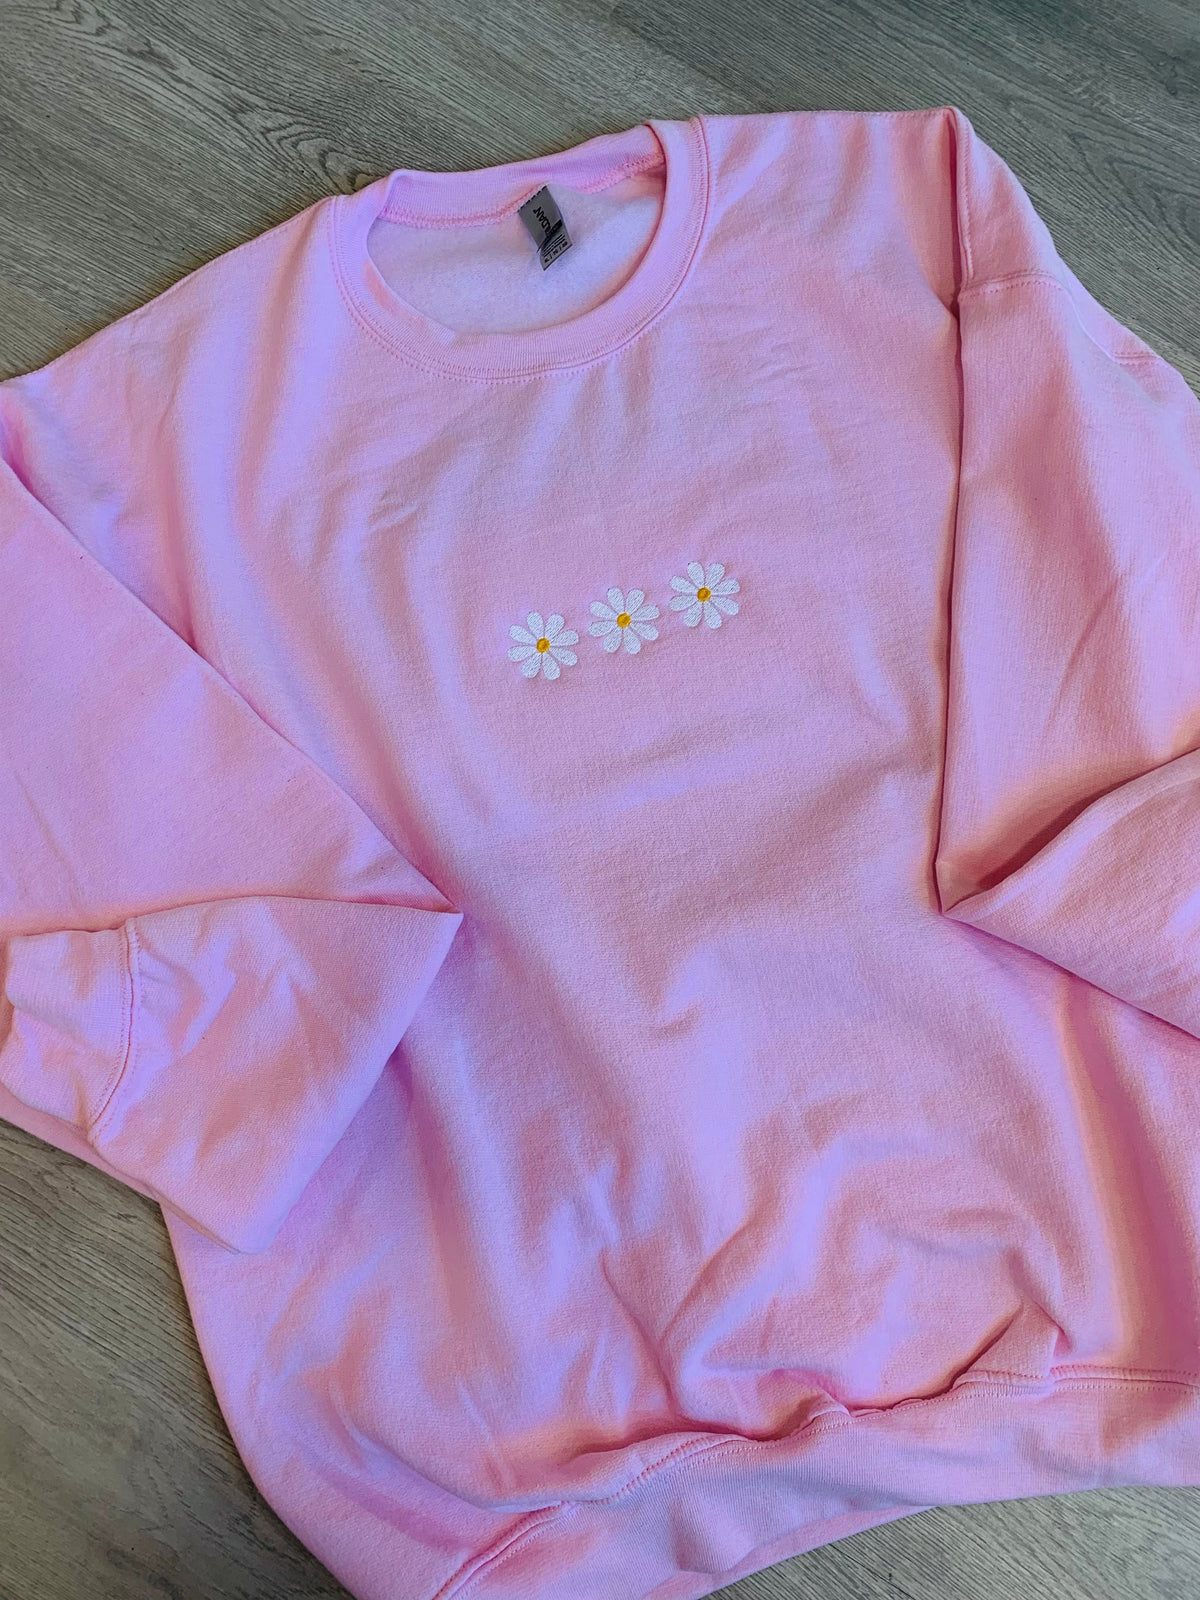 Daisies Embroidered Sweatshirt-243 Custom-Peachy Keen Boutique-Peachy Keen Boutique, Women's Fashion Boutique, Located in Cape Girardeau and Dexter, MO